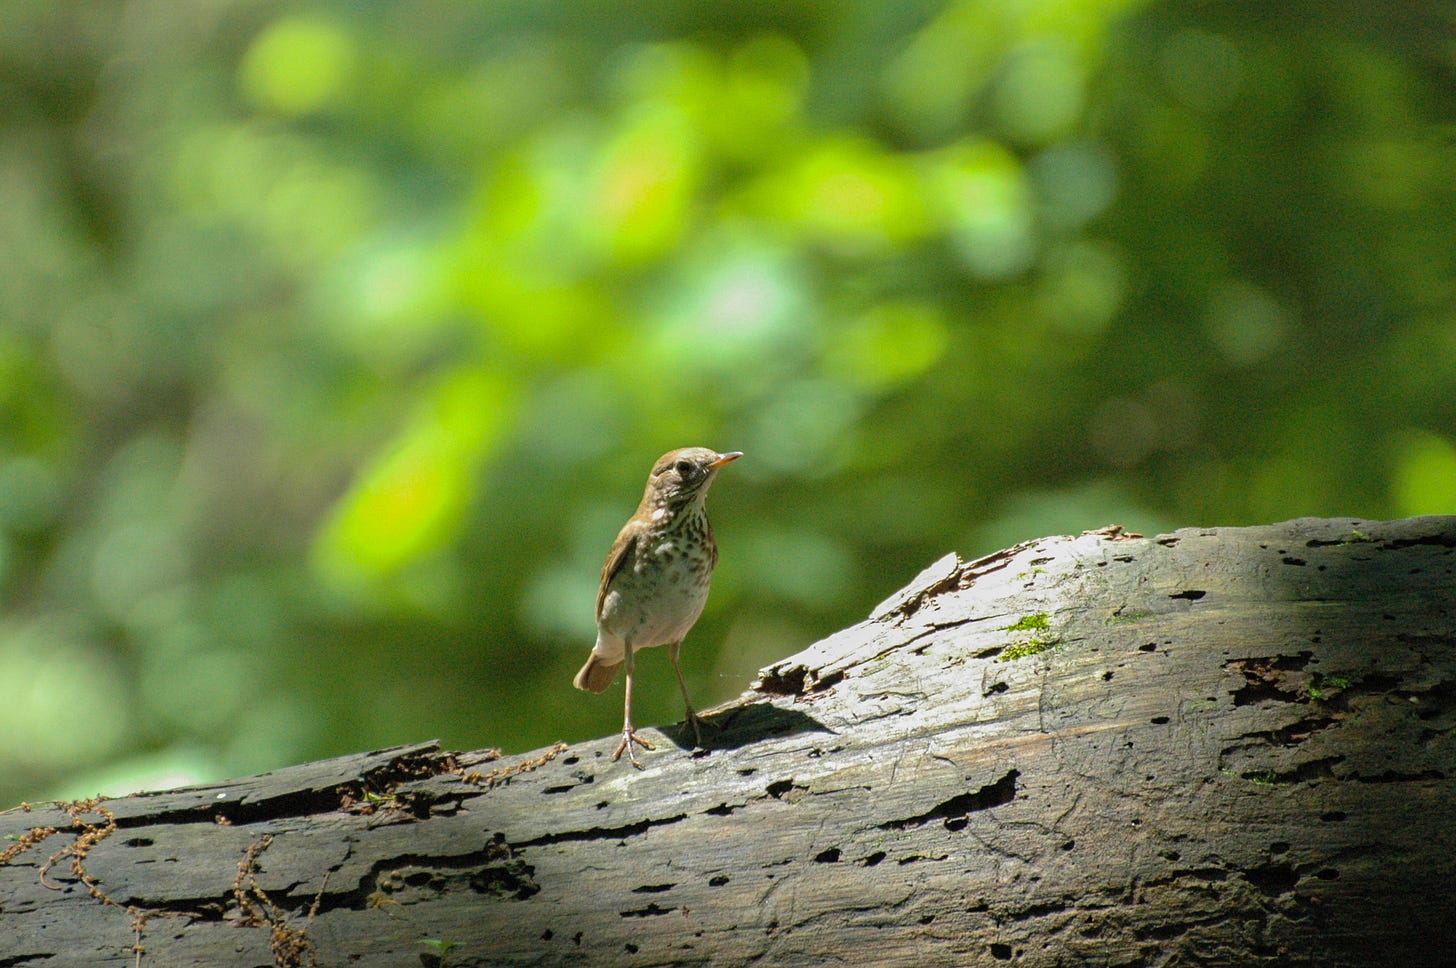 A medium-sized songbird with a white belly and brown spots stands on a large fallen log with green foliage in the background.